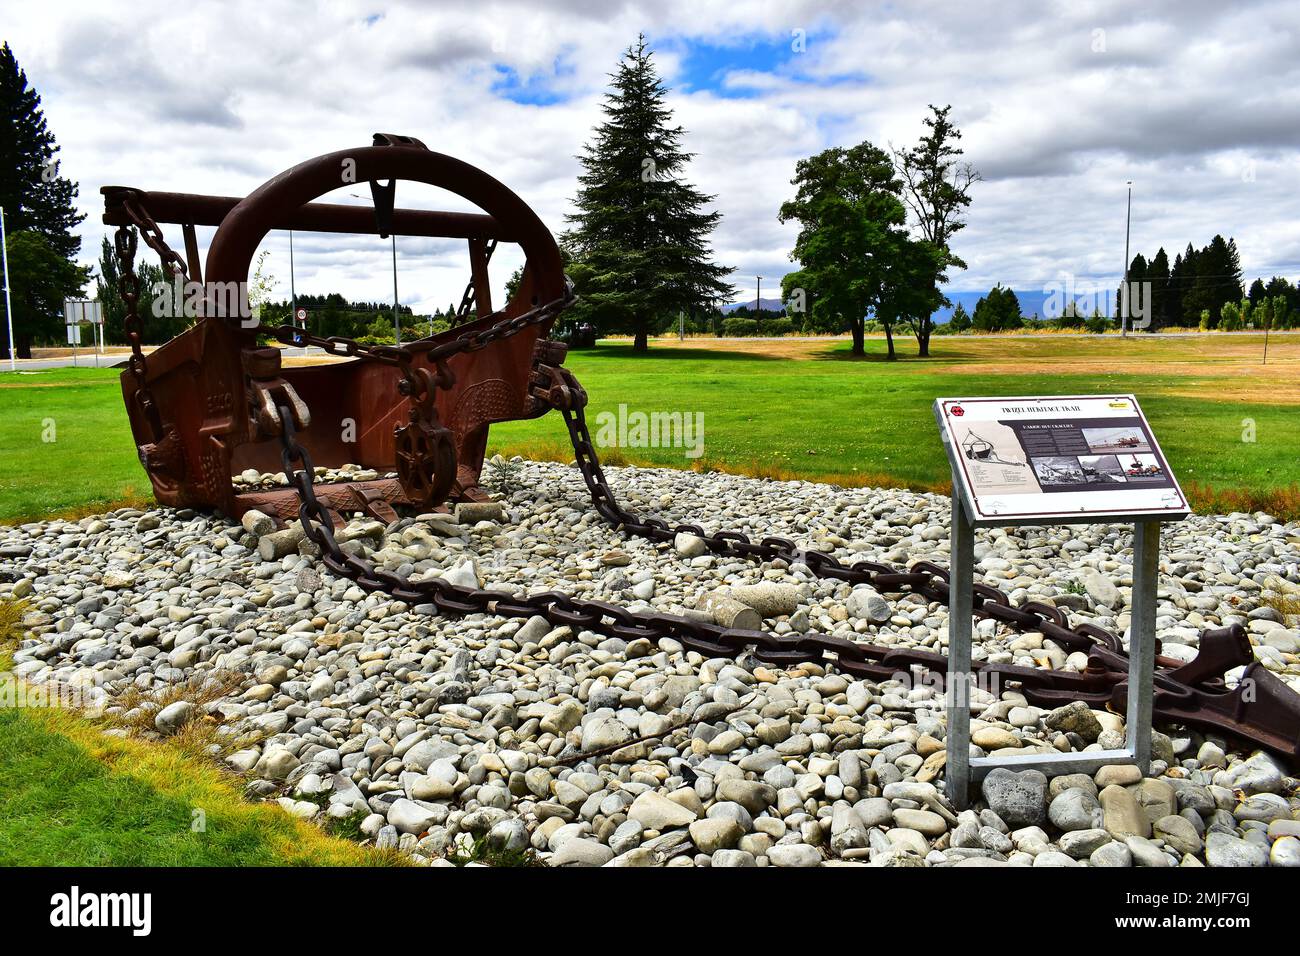 dragline bucket from a past power generation project on display at apublic park. Stock Photo